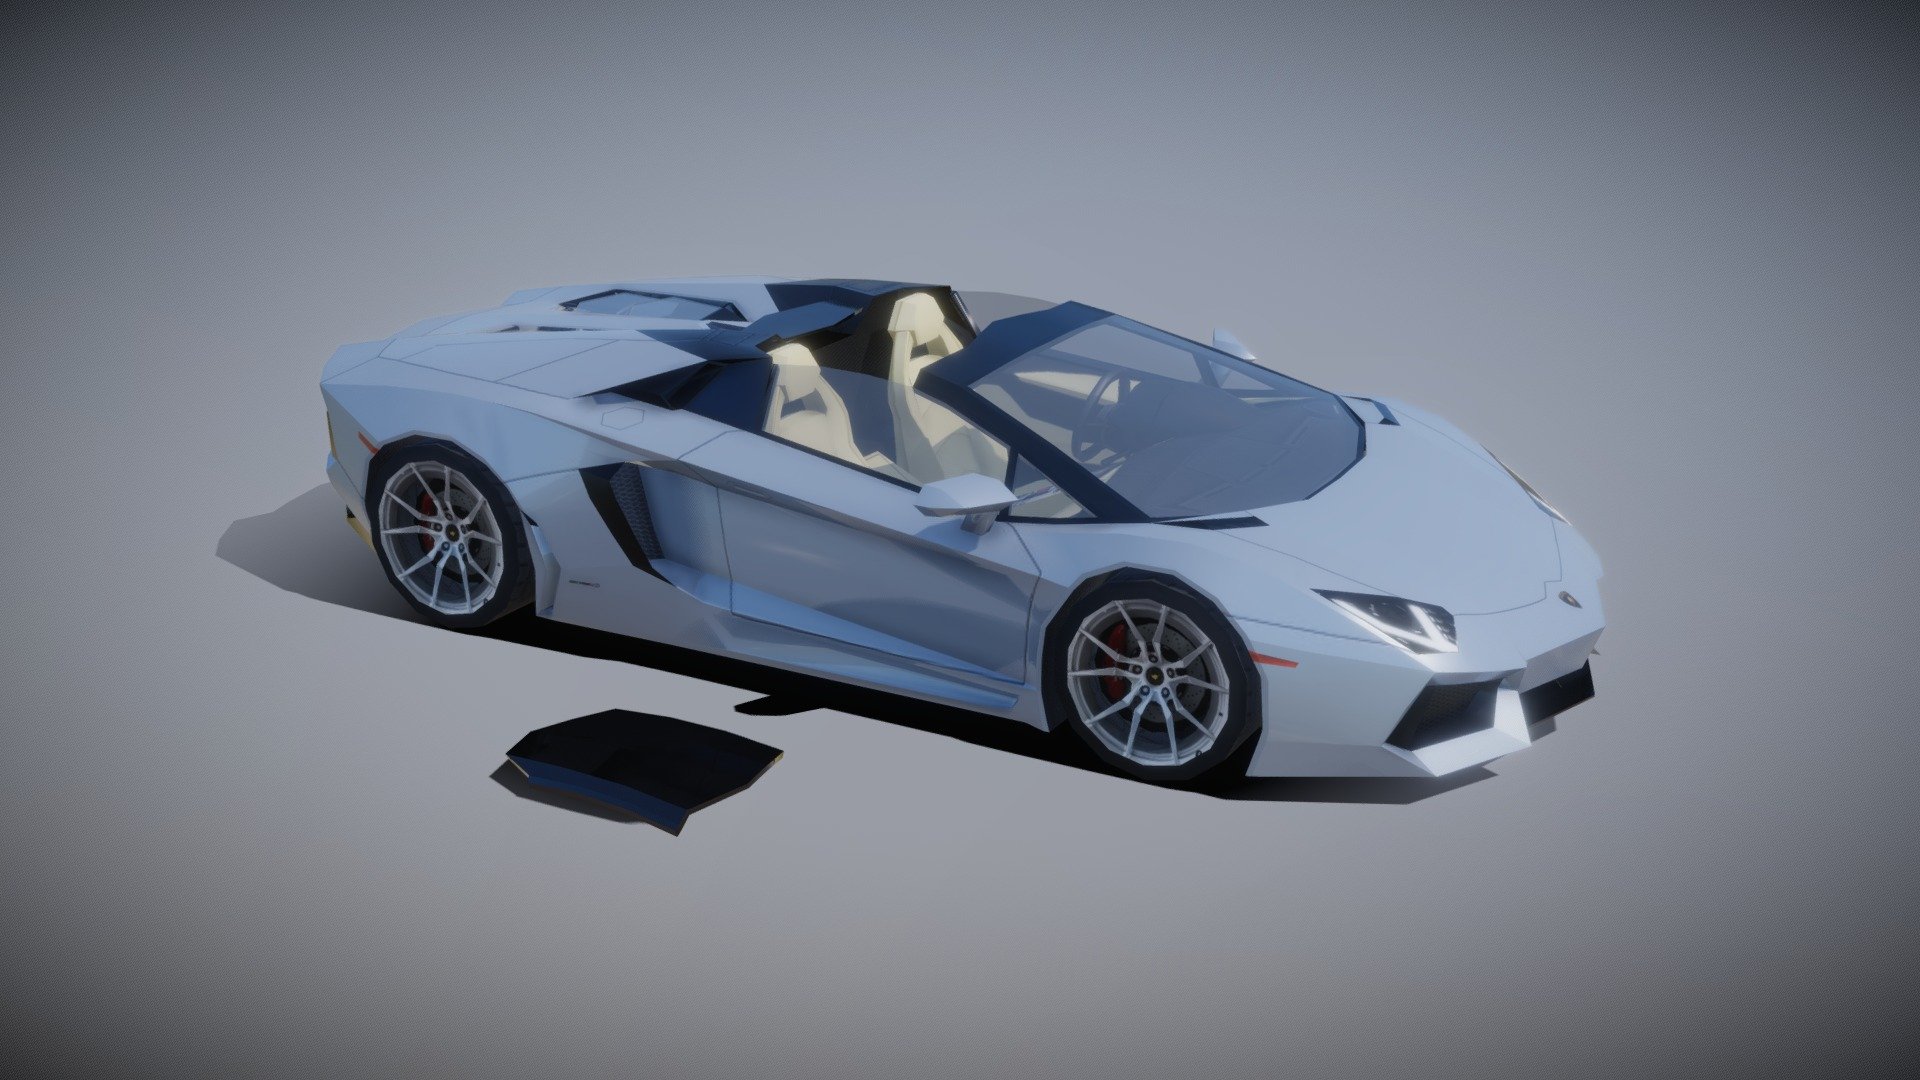 Here's another lowpoly model I made, this time with interior.




Model made in blender

Textures made in Photoshop

Hope you like it! - 2013 Lamborghini Aventador lp700-4 Roadster - Download Free 3D model by _s0h1o9b (@s0h1o9b) 3d model